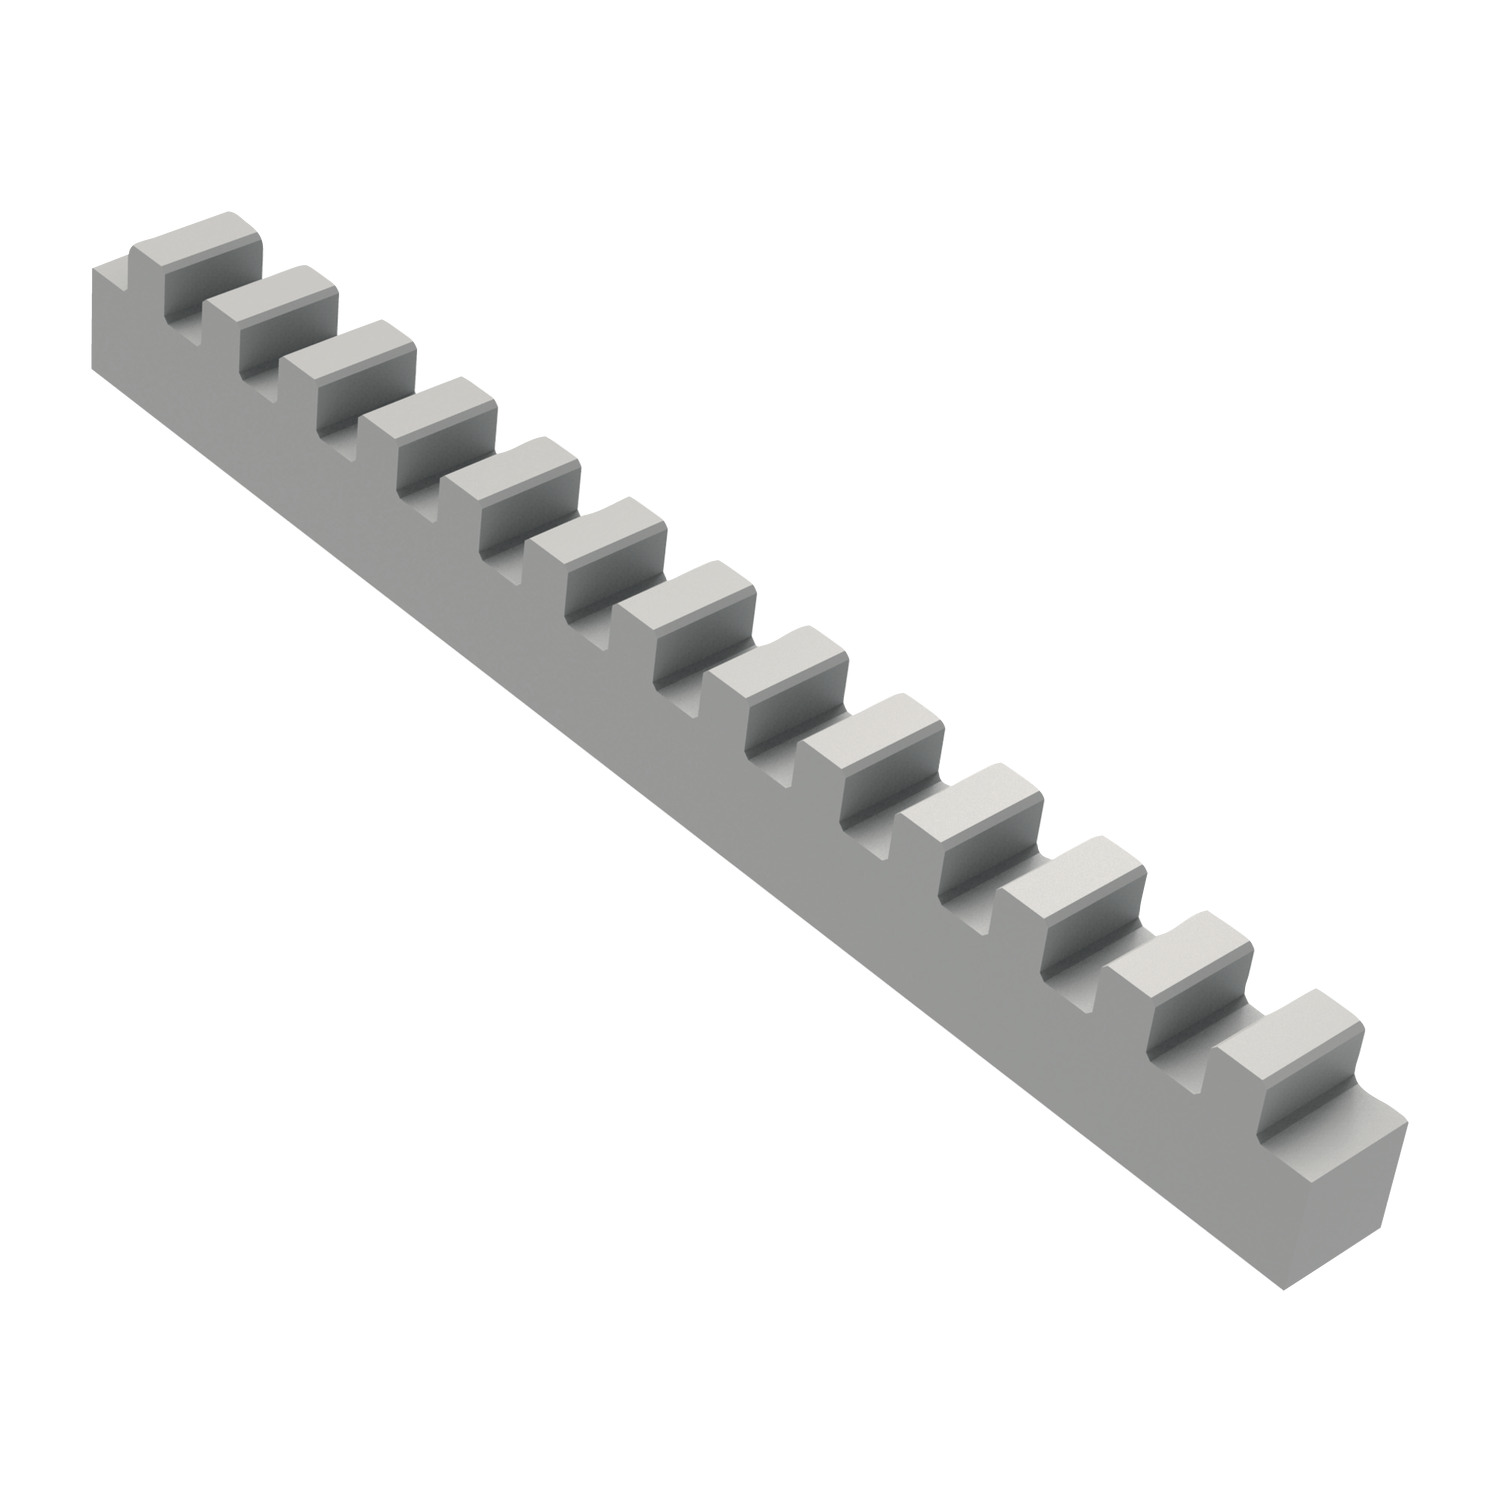 Q3150 - Toothed Rack - Module 0,5 to 1,0